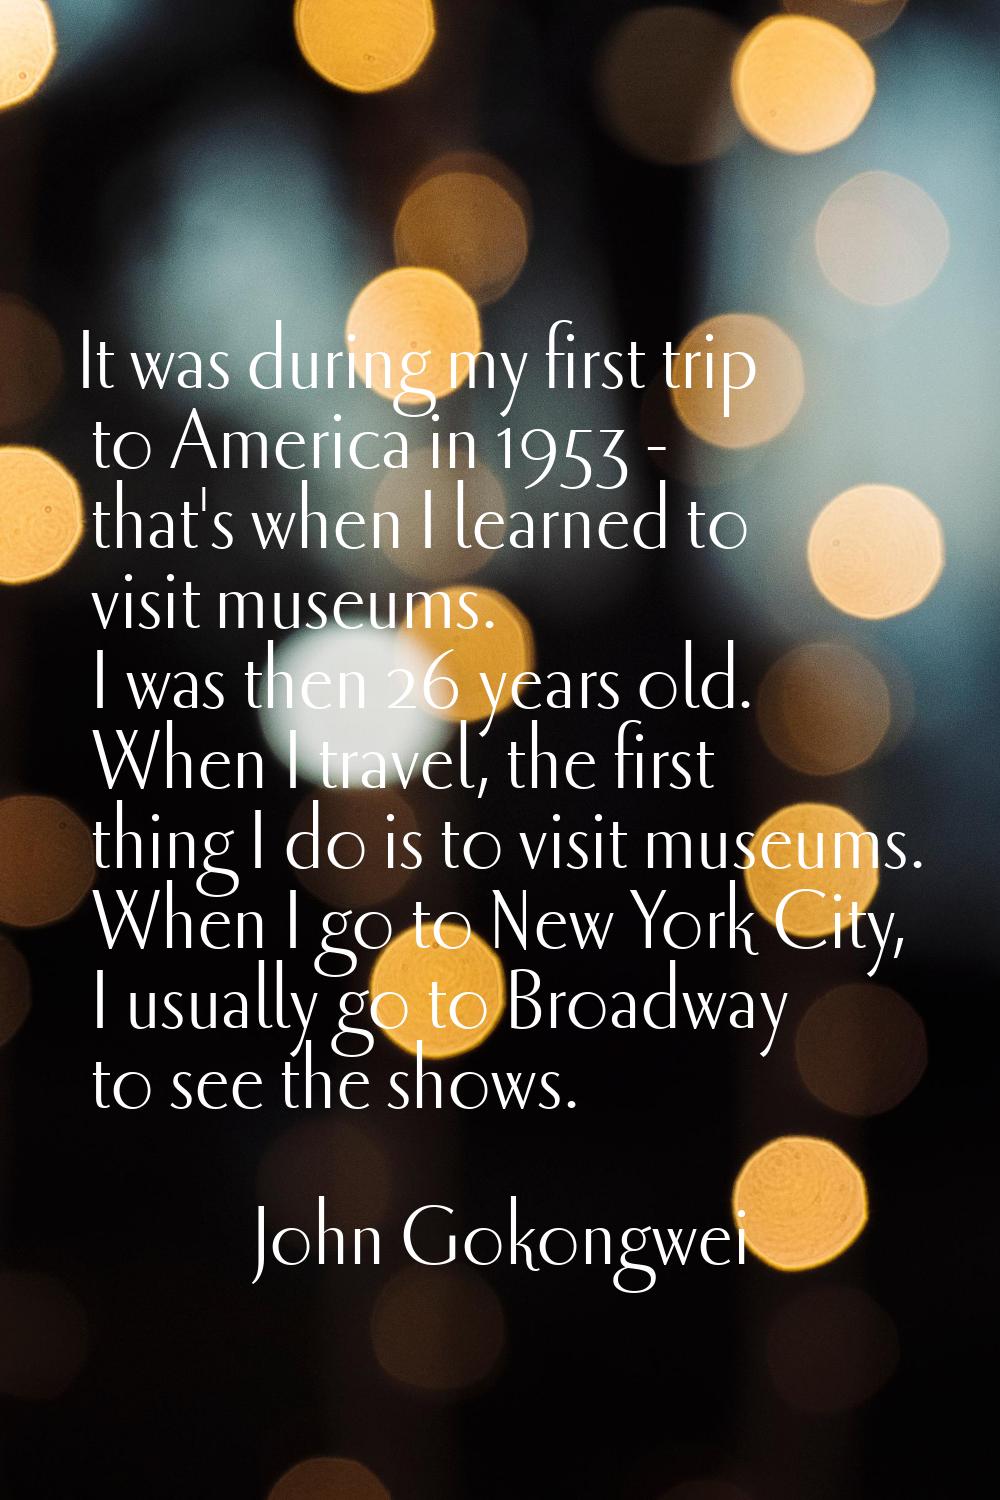 It was during my first trip to America in 1953 - that's when I learned to visit museums. I was then